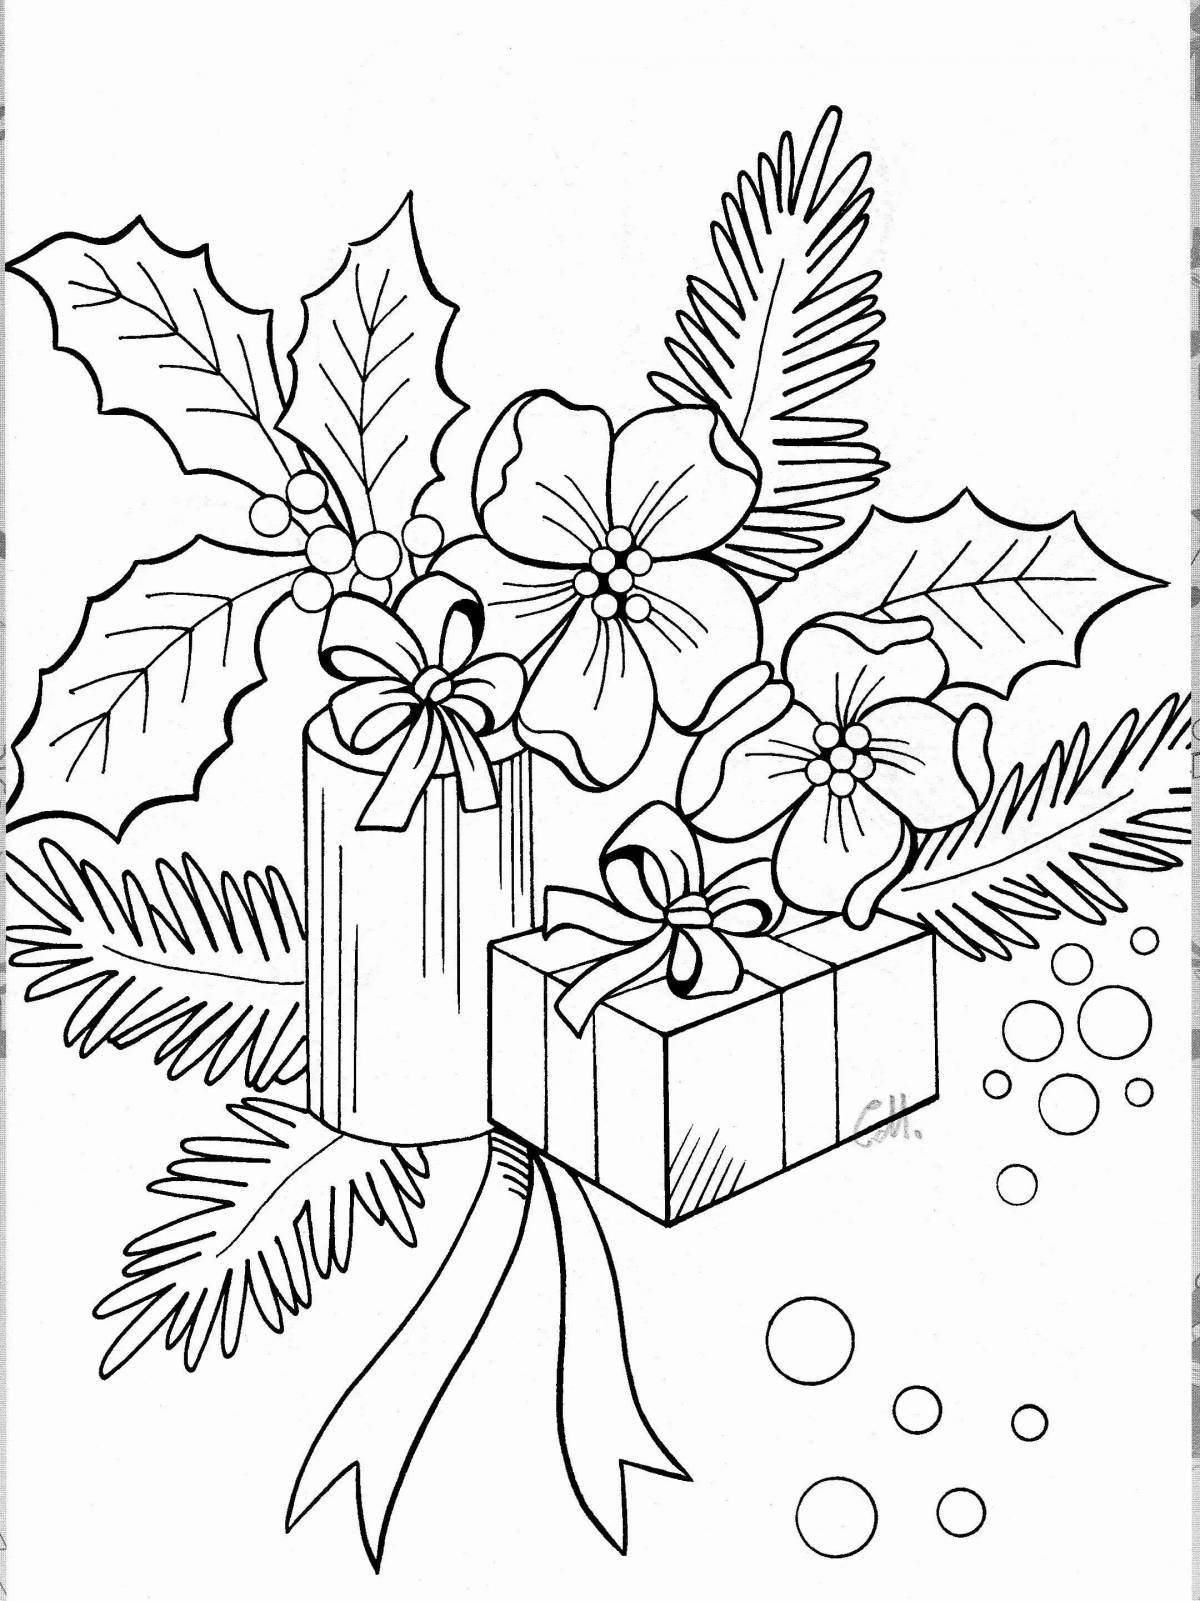 Merry Christmas and Happy New Year holiday coloring book